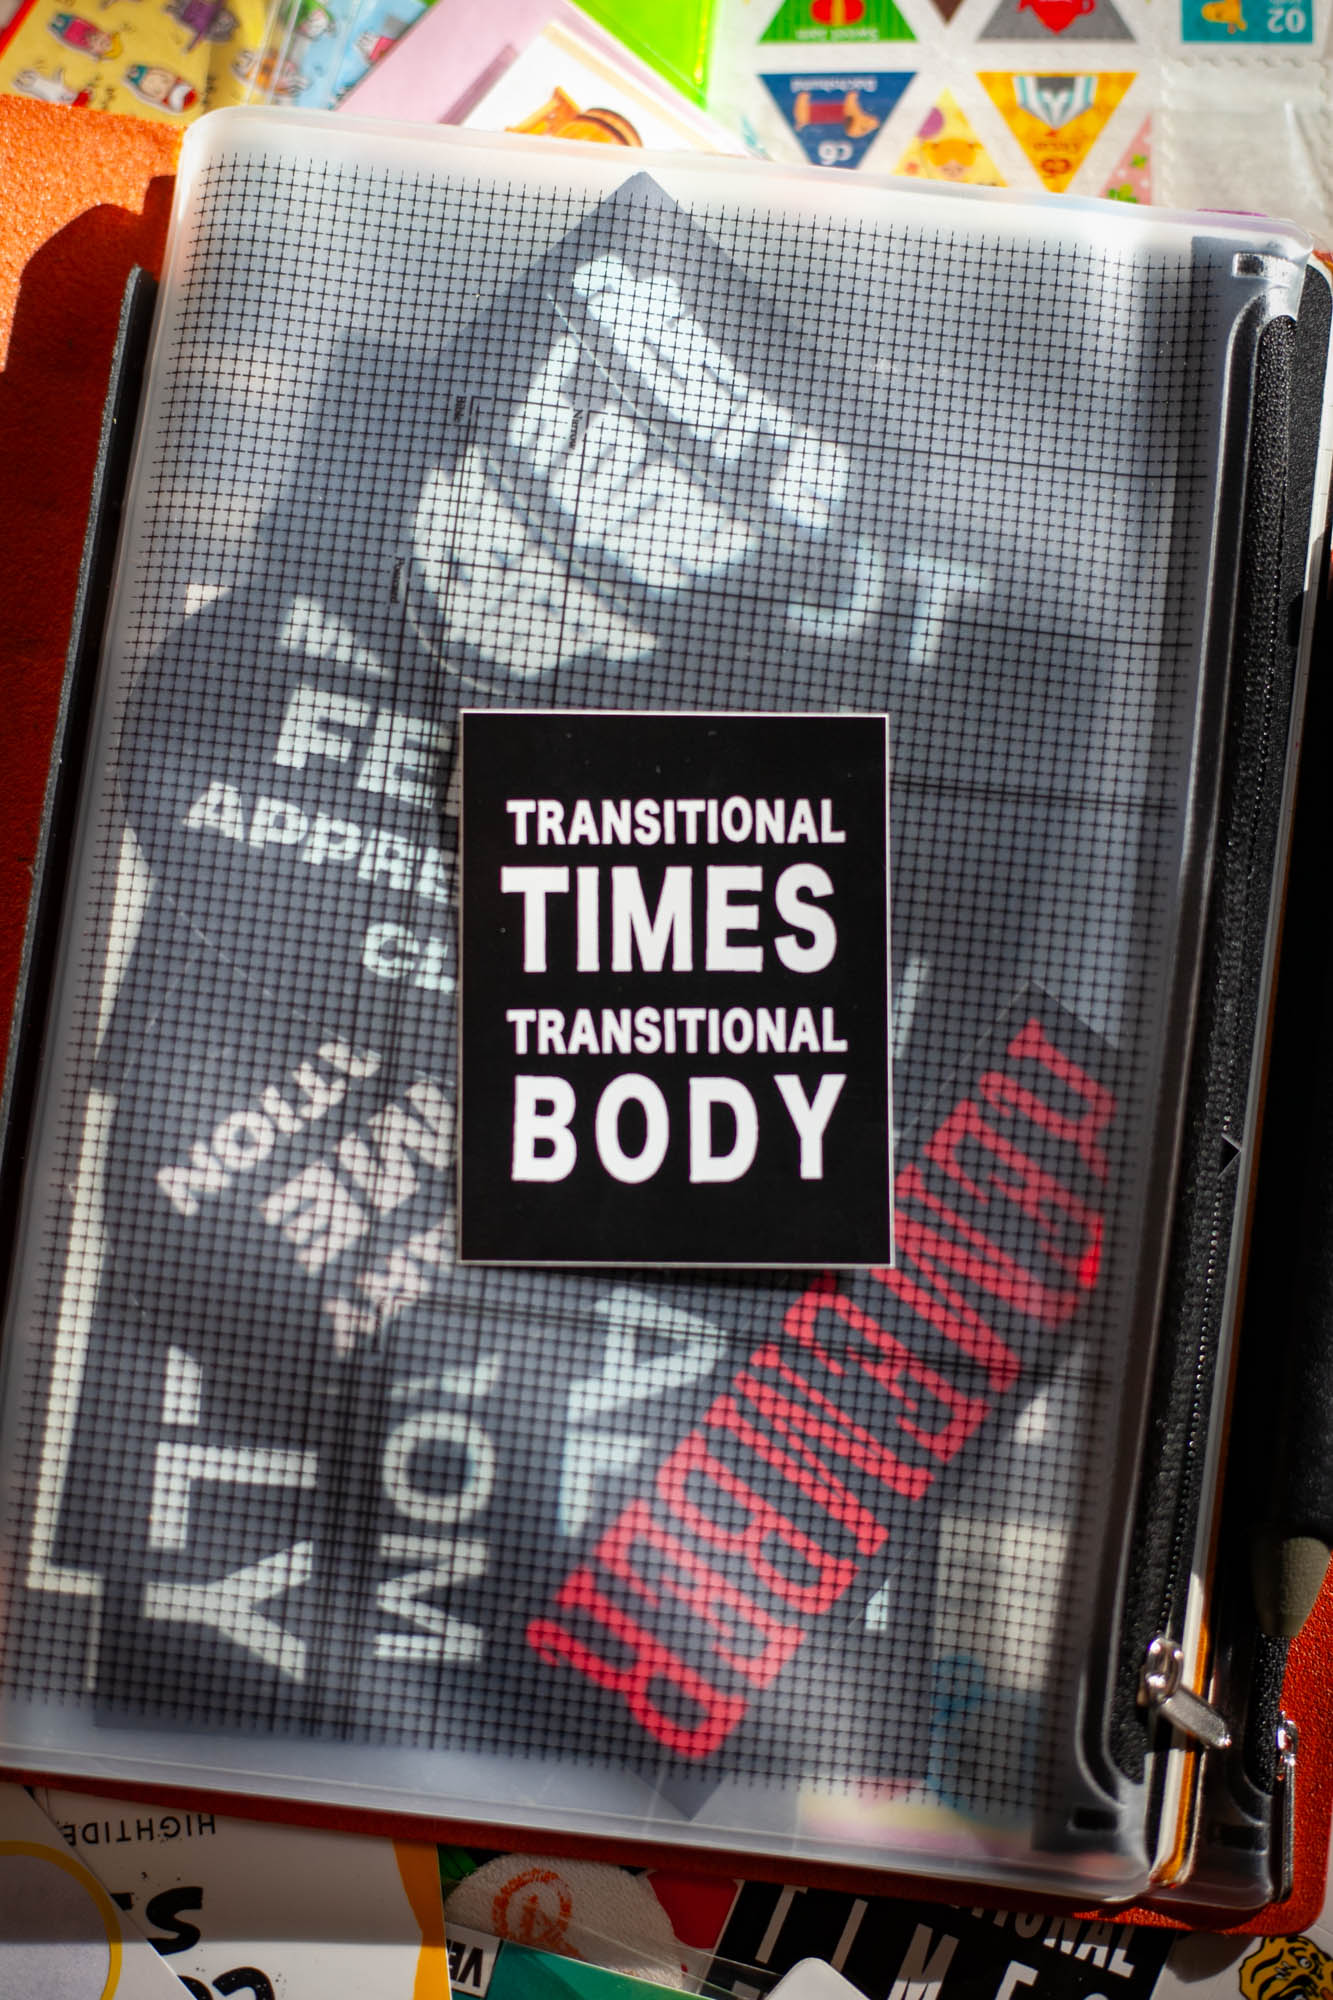 transitional times transitional body sticker white ink on black